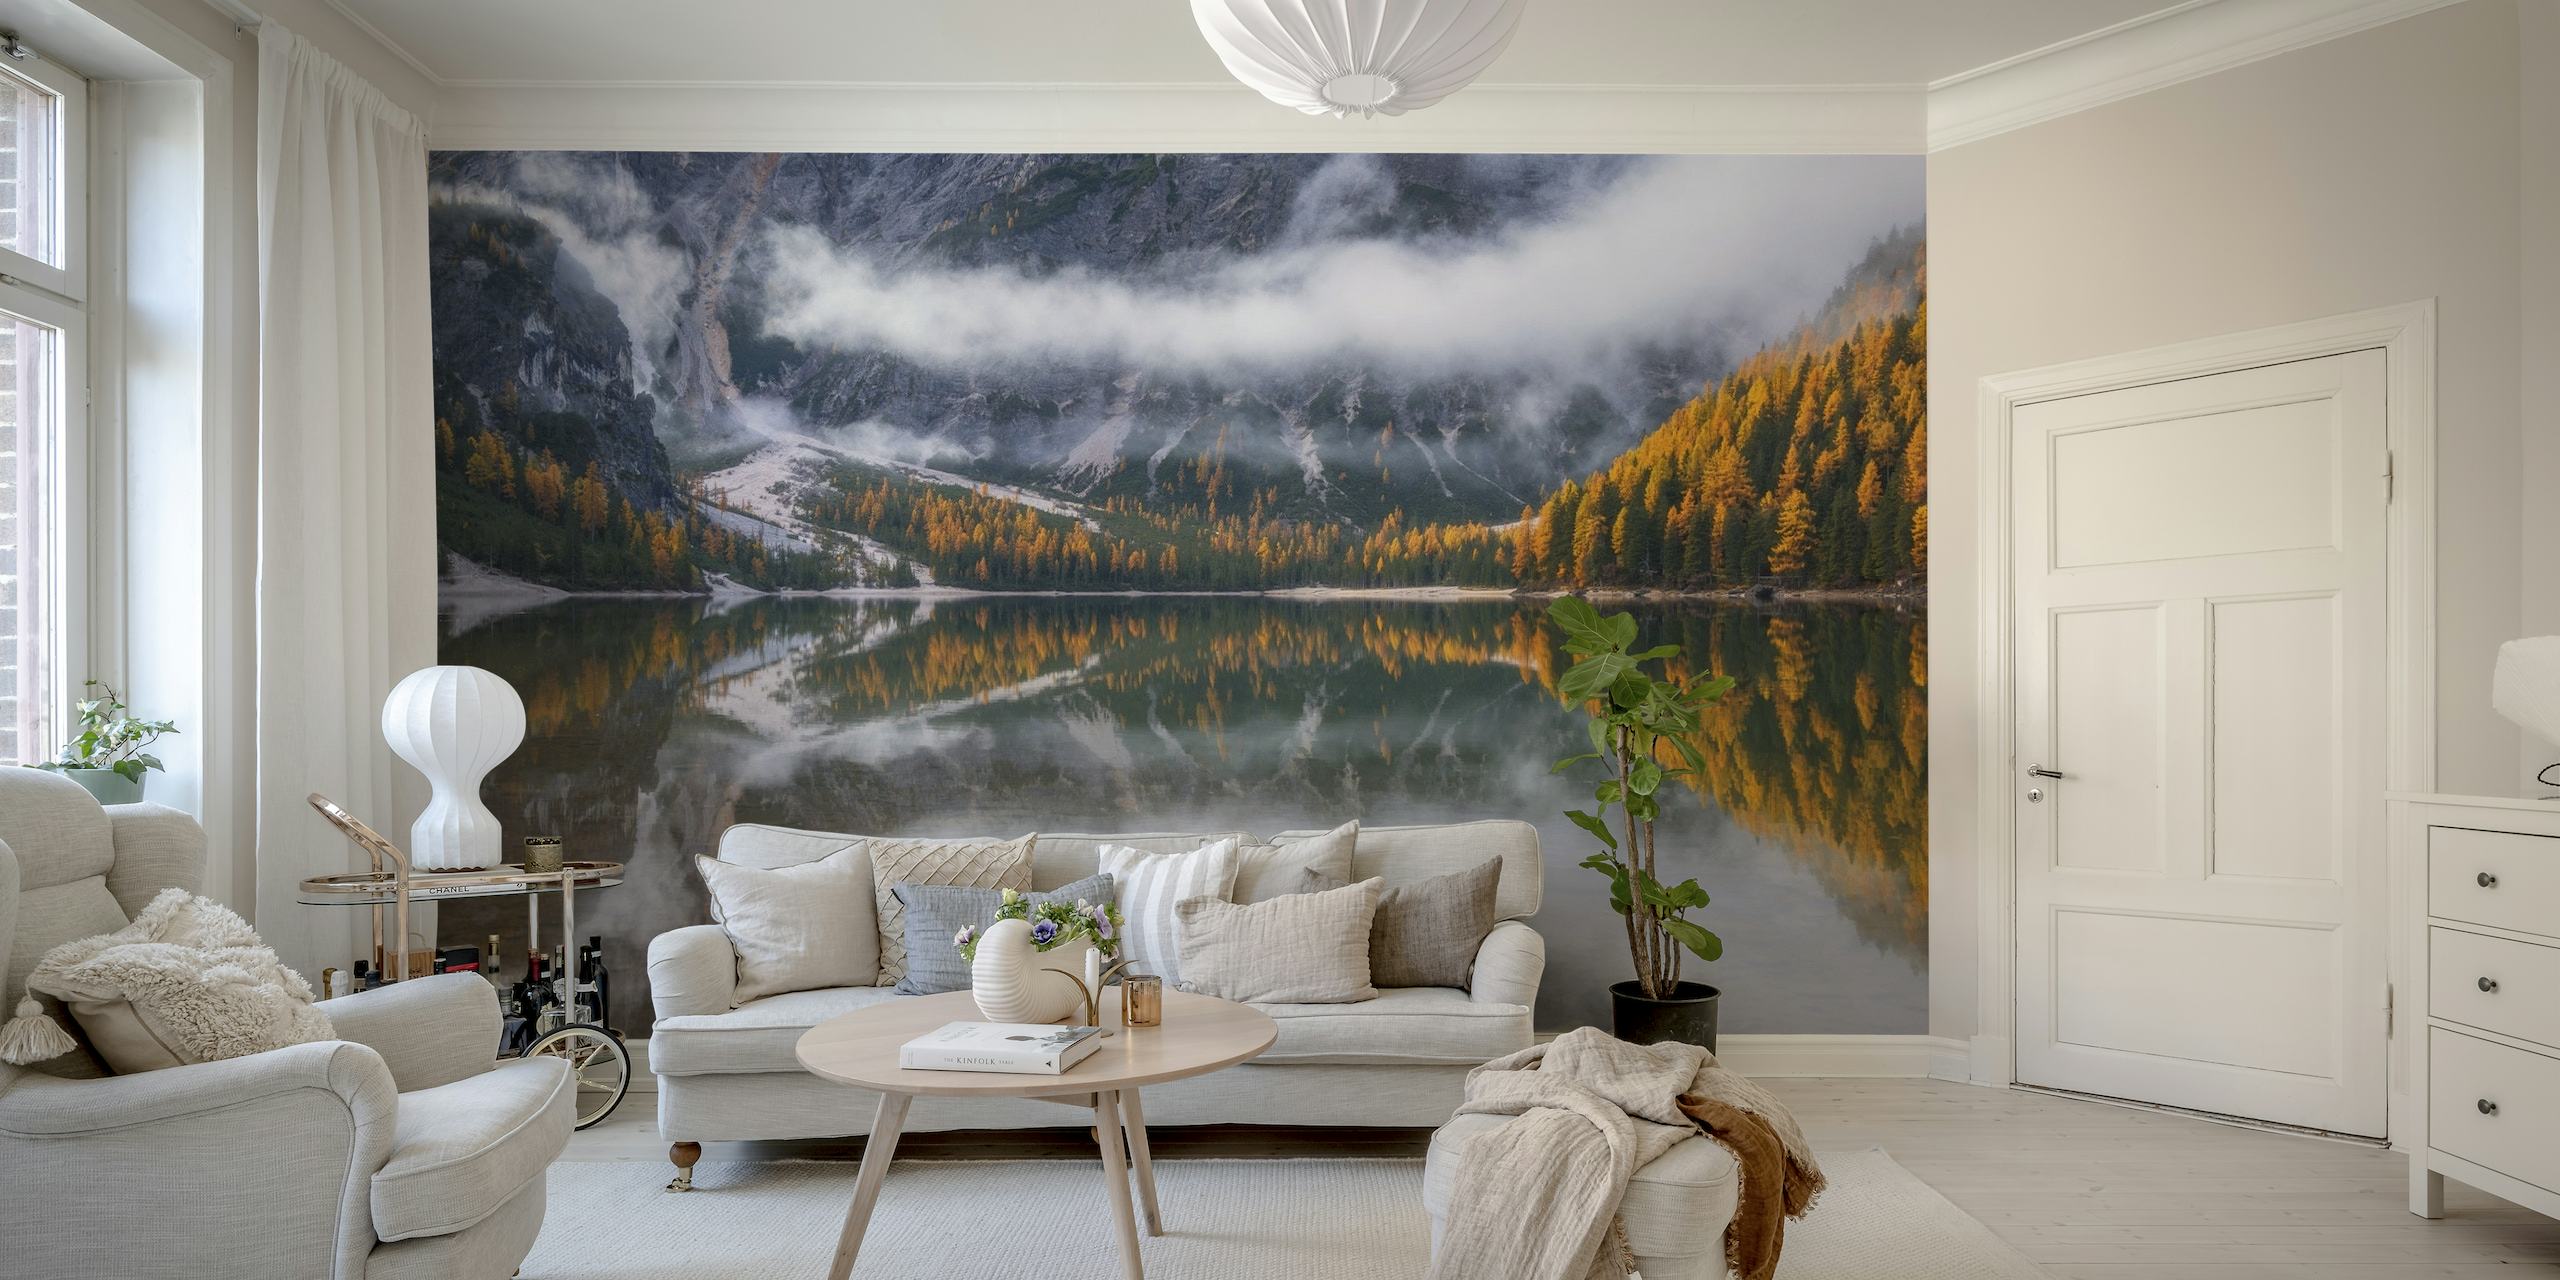 Autumn lake reflection wall mural with foggy mountain and trees